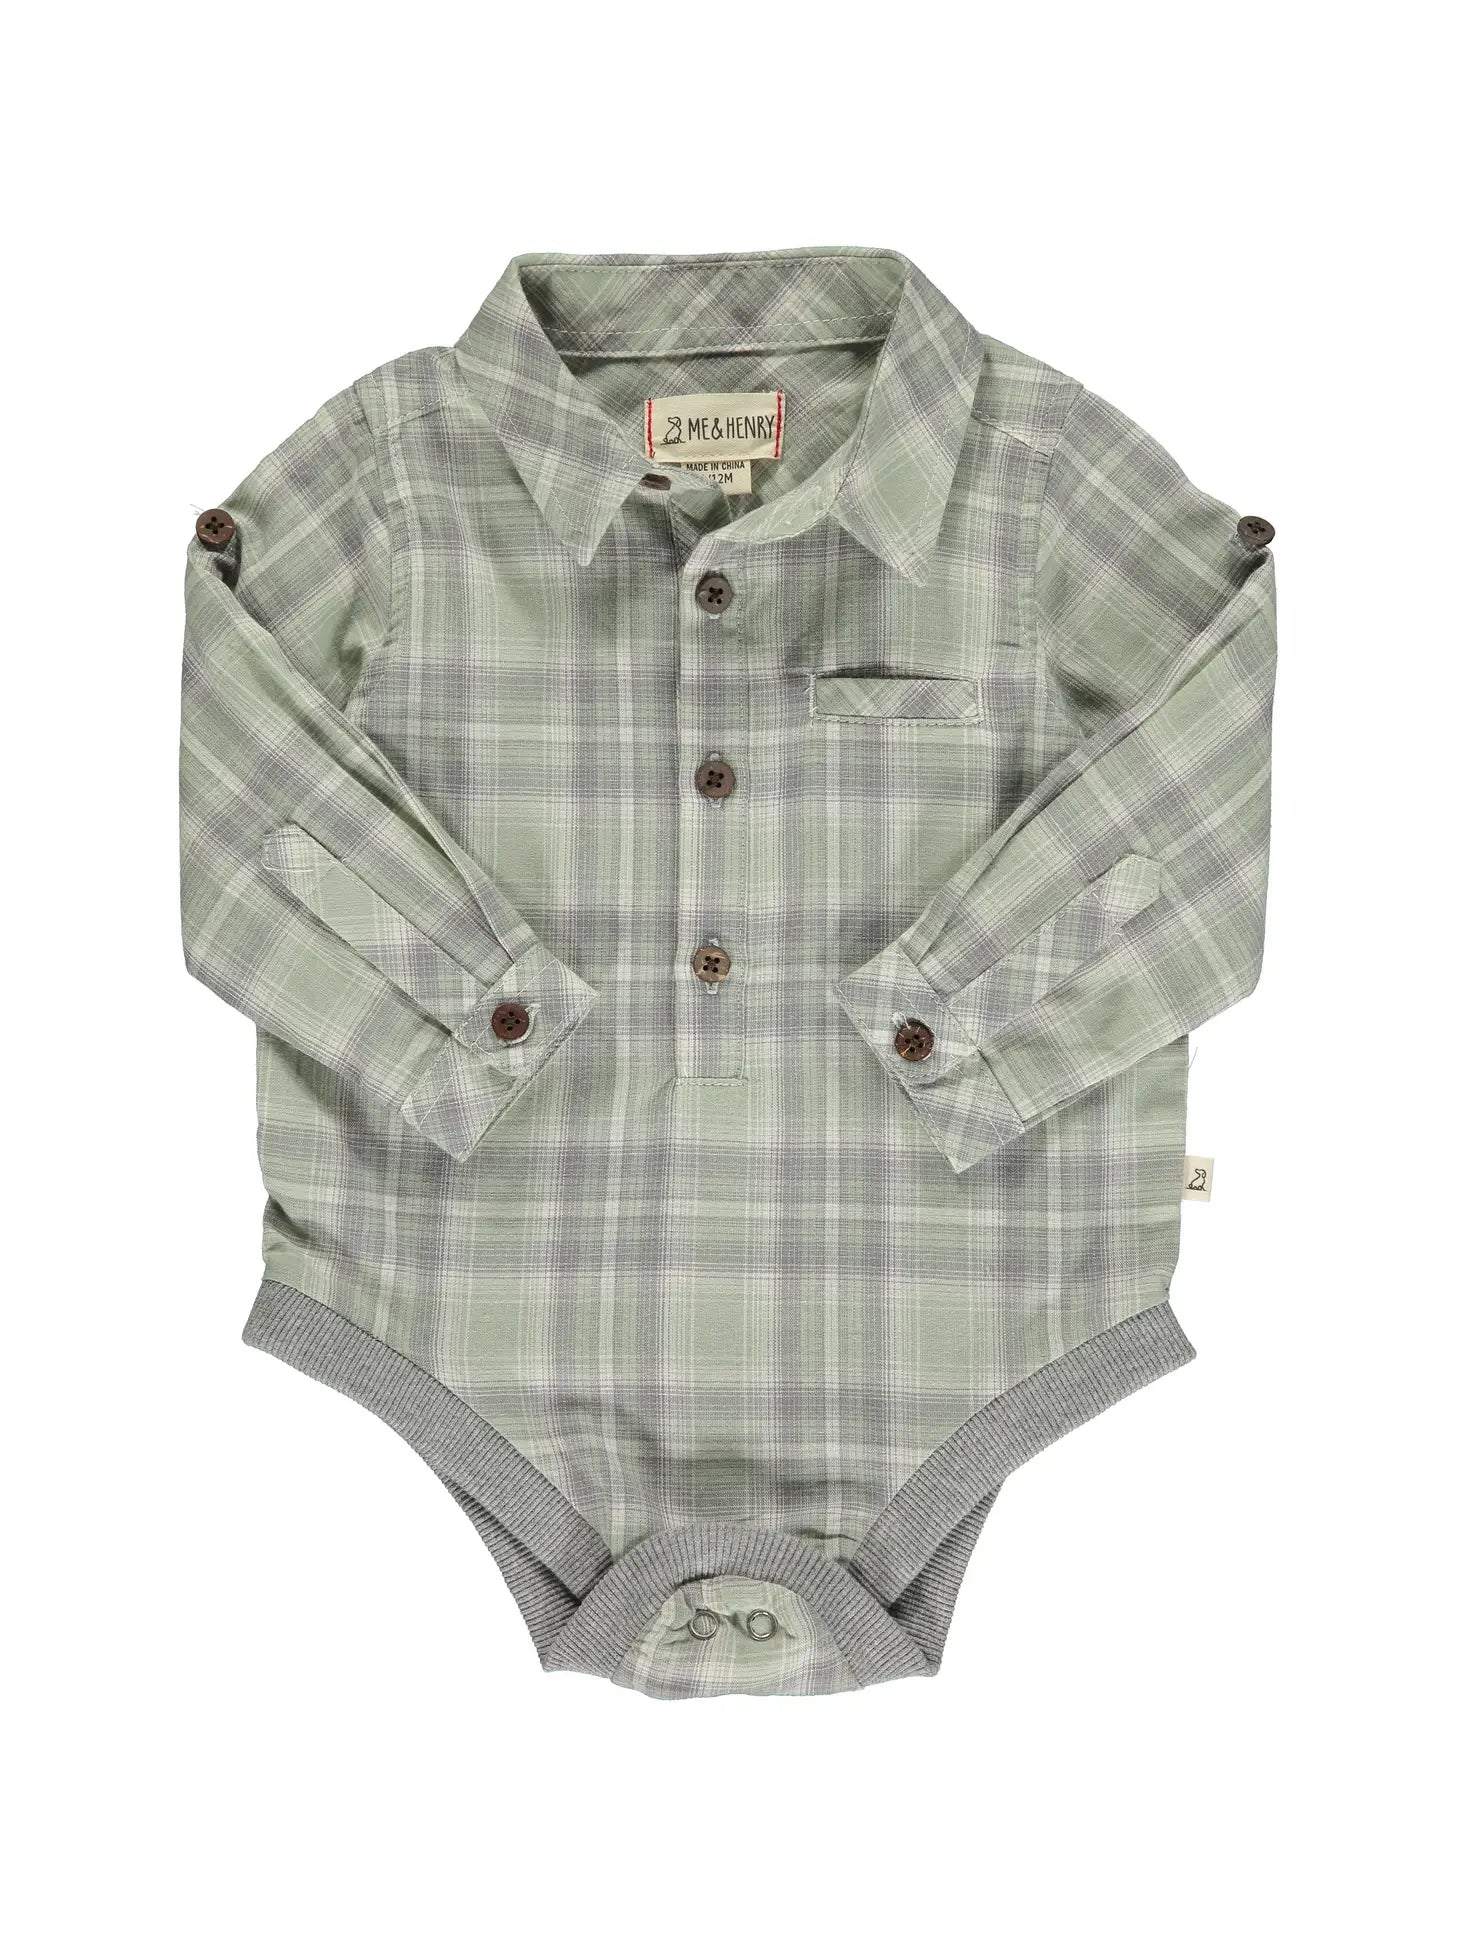 me and Henry sage and grey plaid jasper woven onesie long sleeve collared button detail